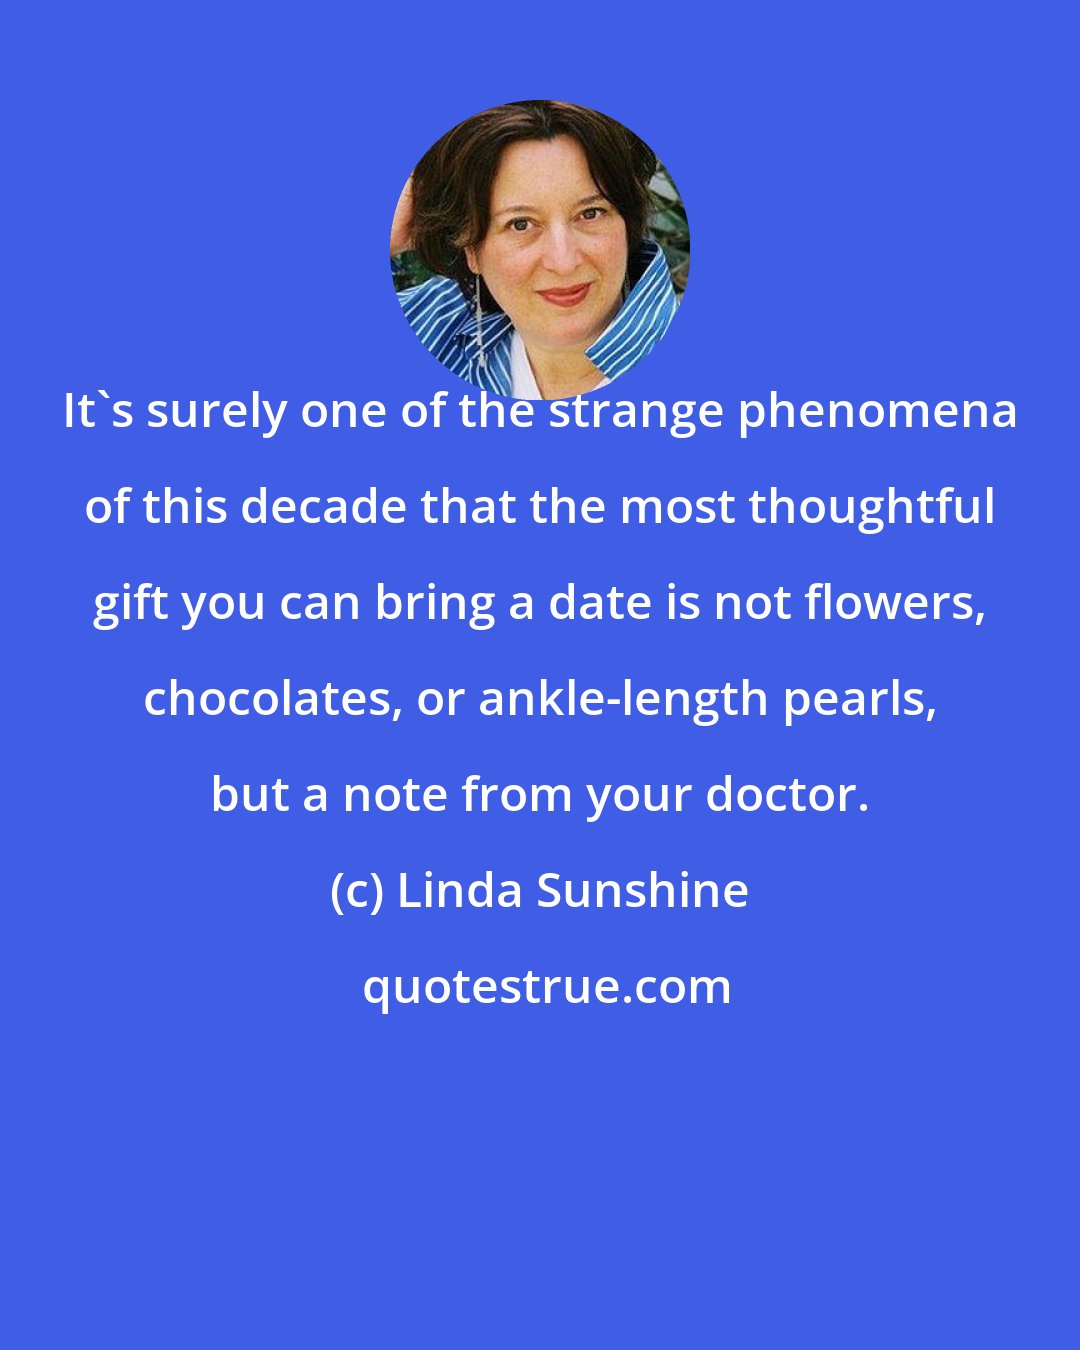 Linda Sunshine: It's surely one of the strange phenomena of this decade that the most thoughtful gift you can bring a date is not flowers, chocolates, or ankle-length pearls, but a note from your doctor.